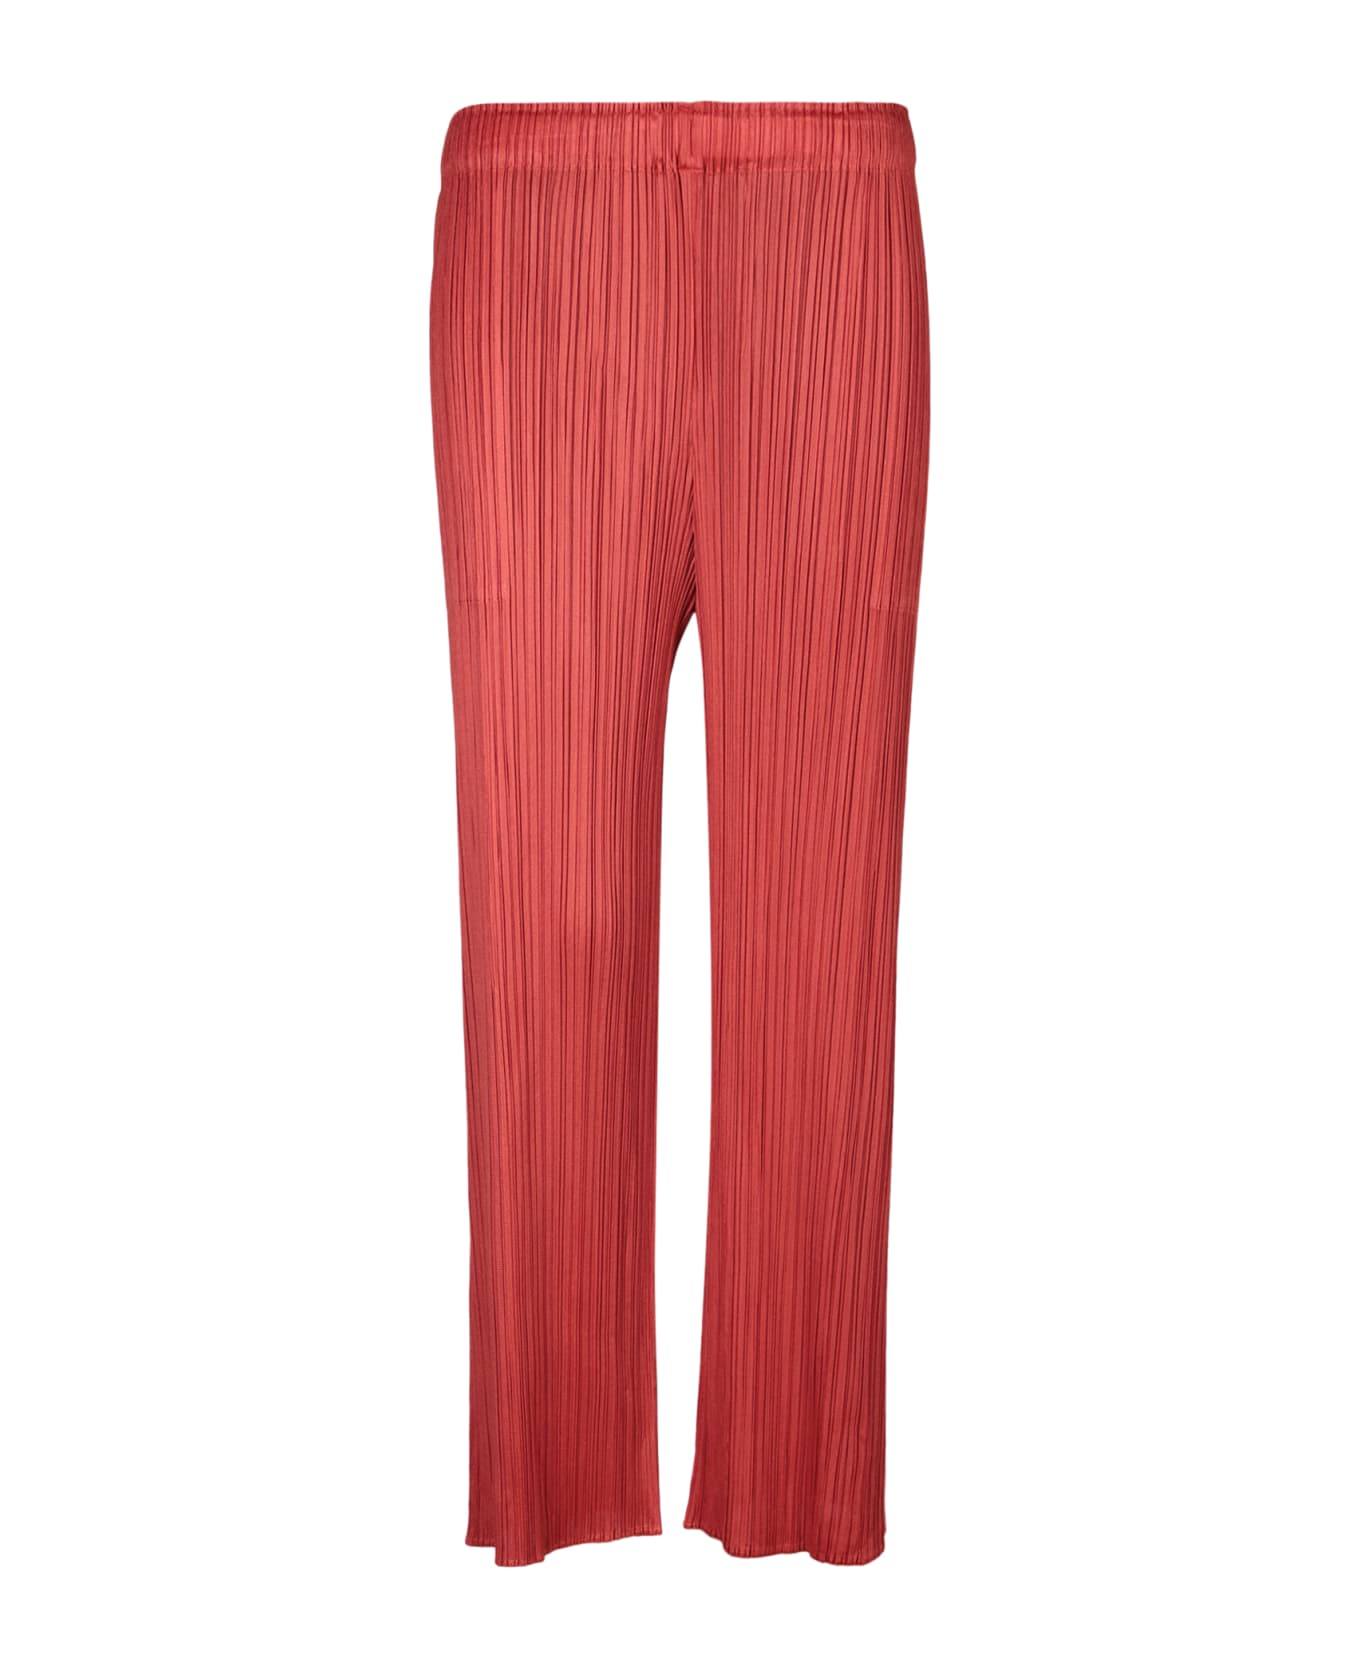 Issey Miyake Pleats Please Red Trousers - Red